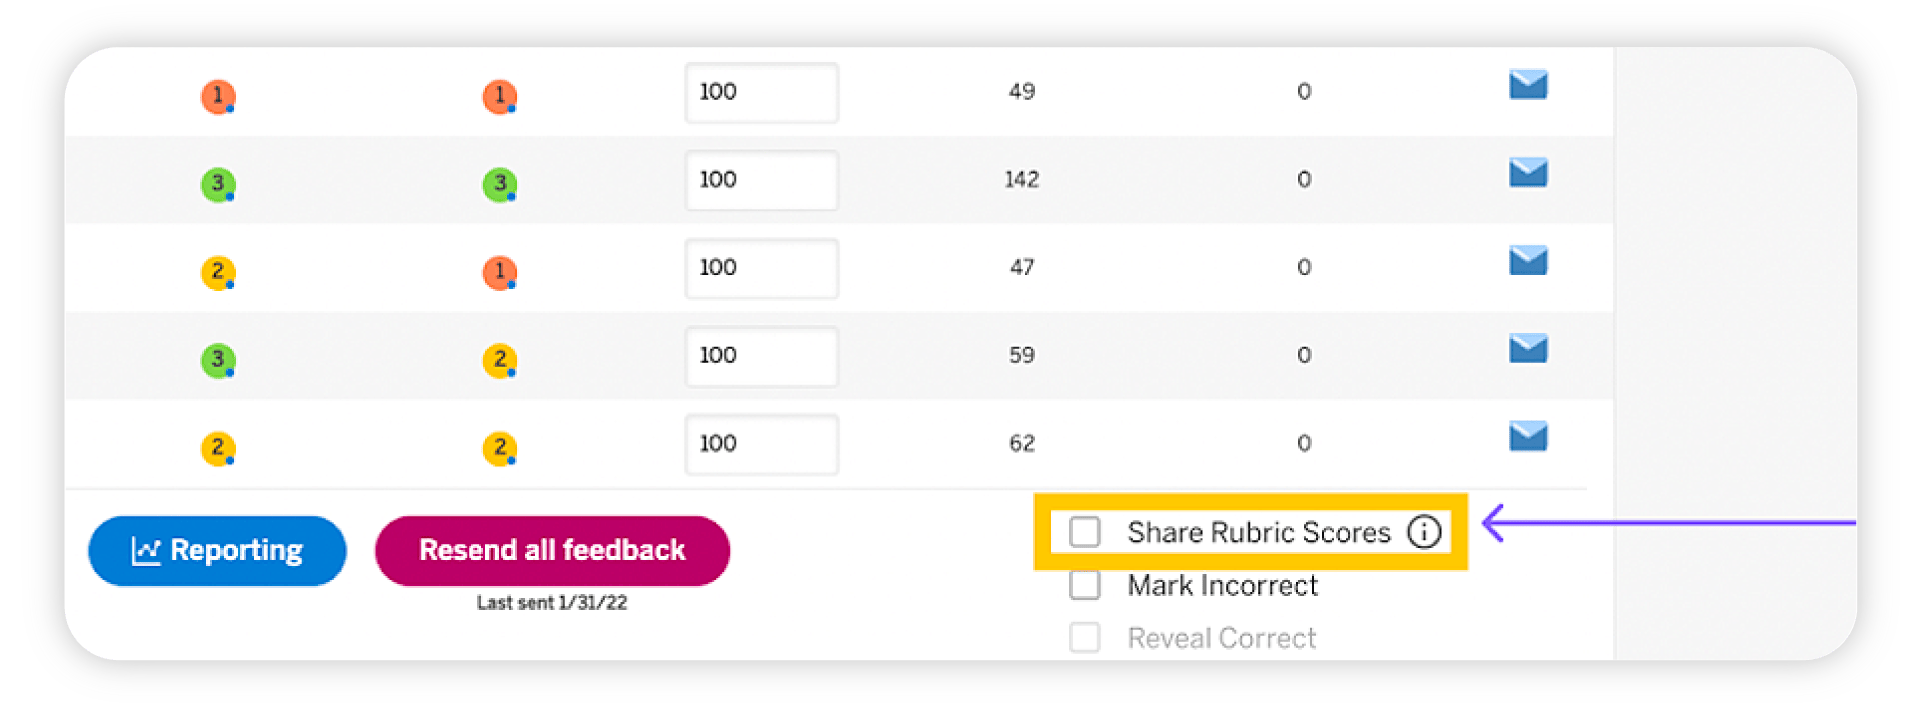 Digital interface displaying student scores with icons for sending feedback, sharing rubric scores, and marking incorrect answers, now featuring exciting updates.